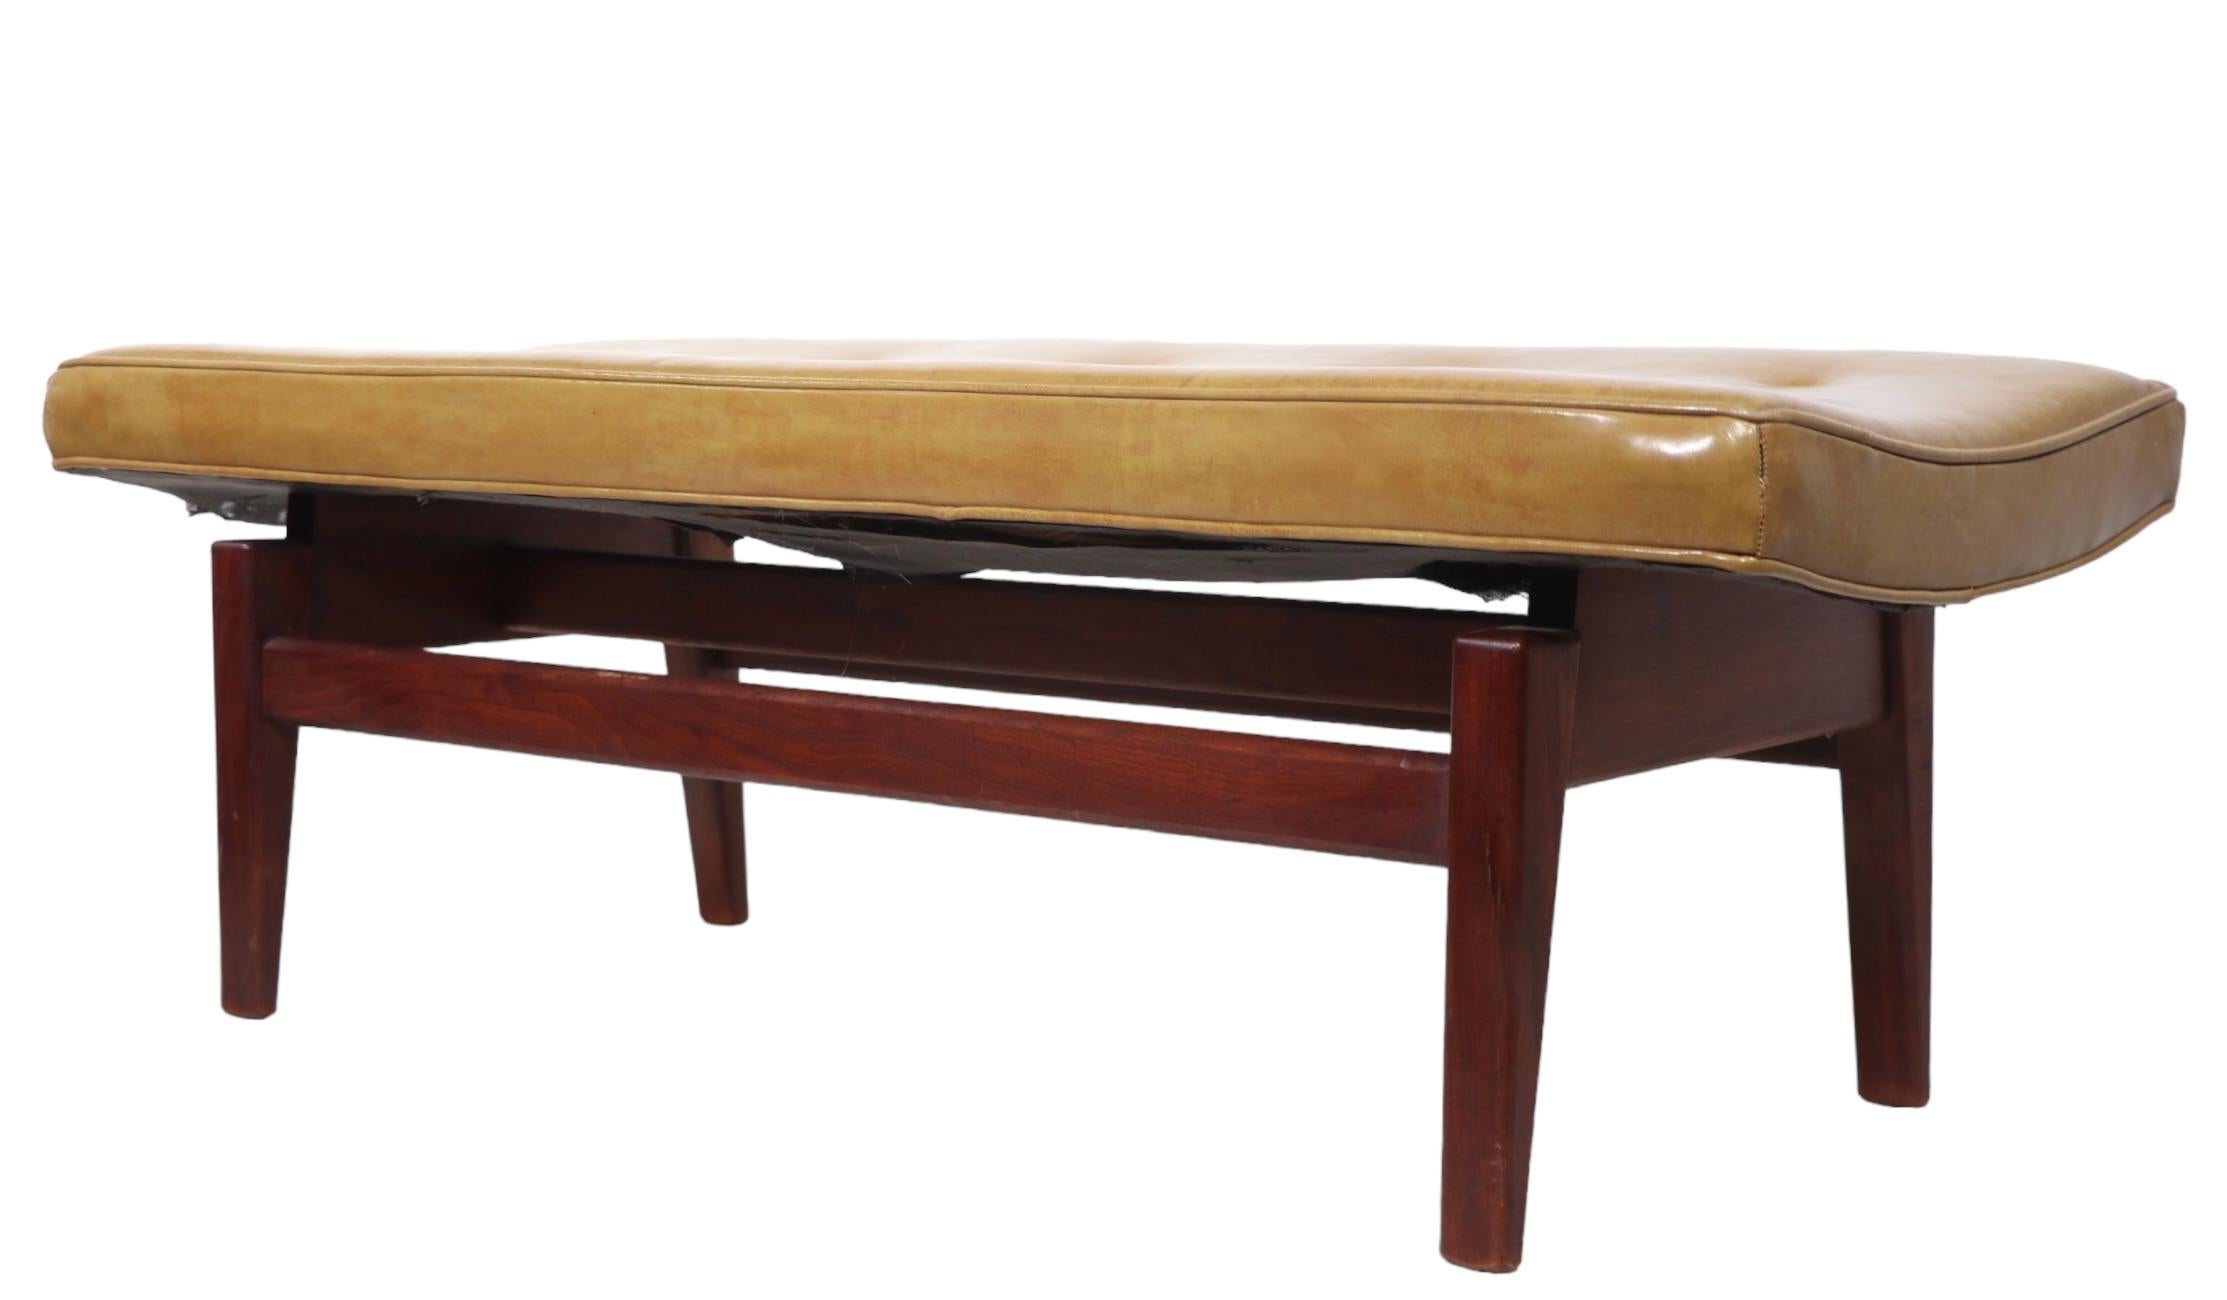   Architectural Mid Century Jens Risom Bench with Walnut Legs and Leather Top  For Sale 5